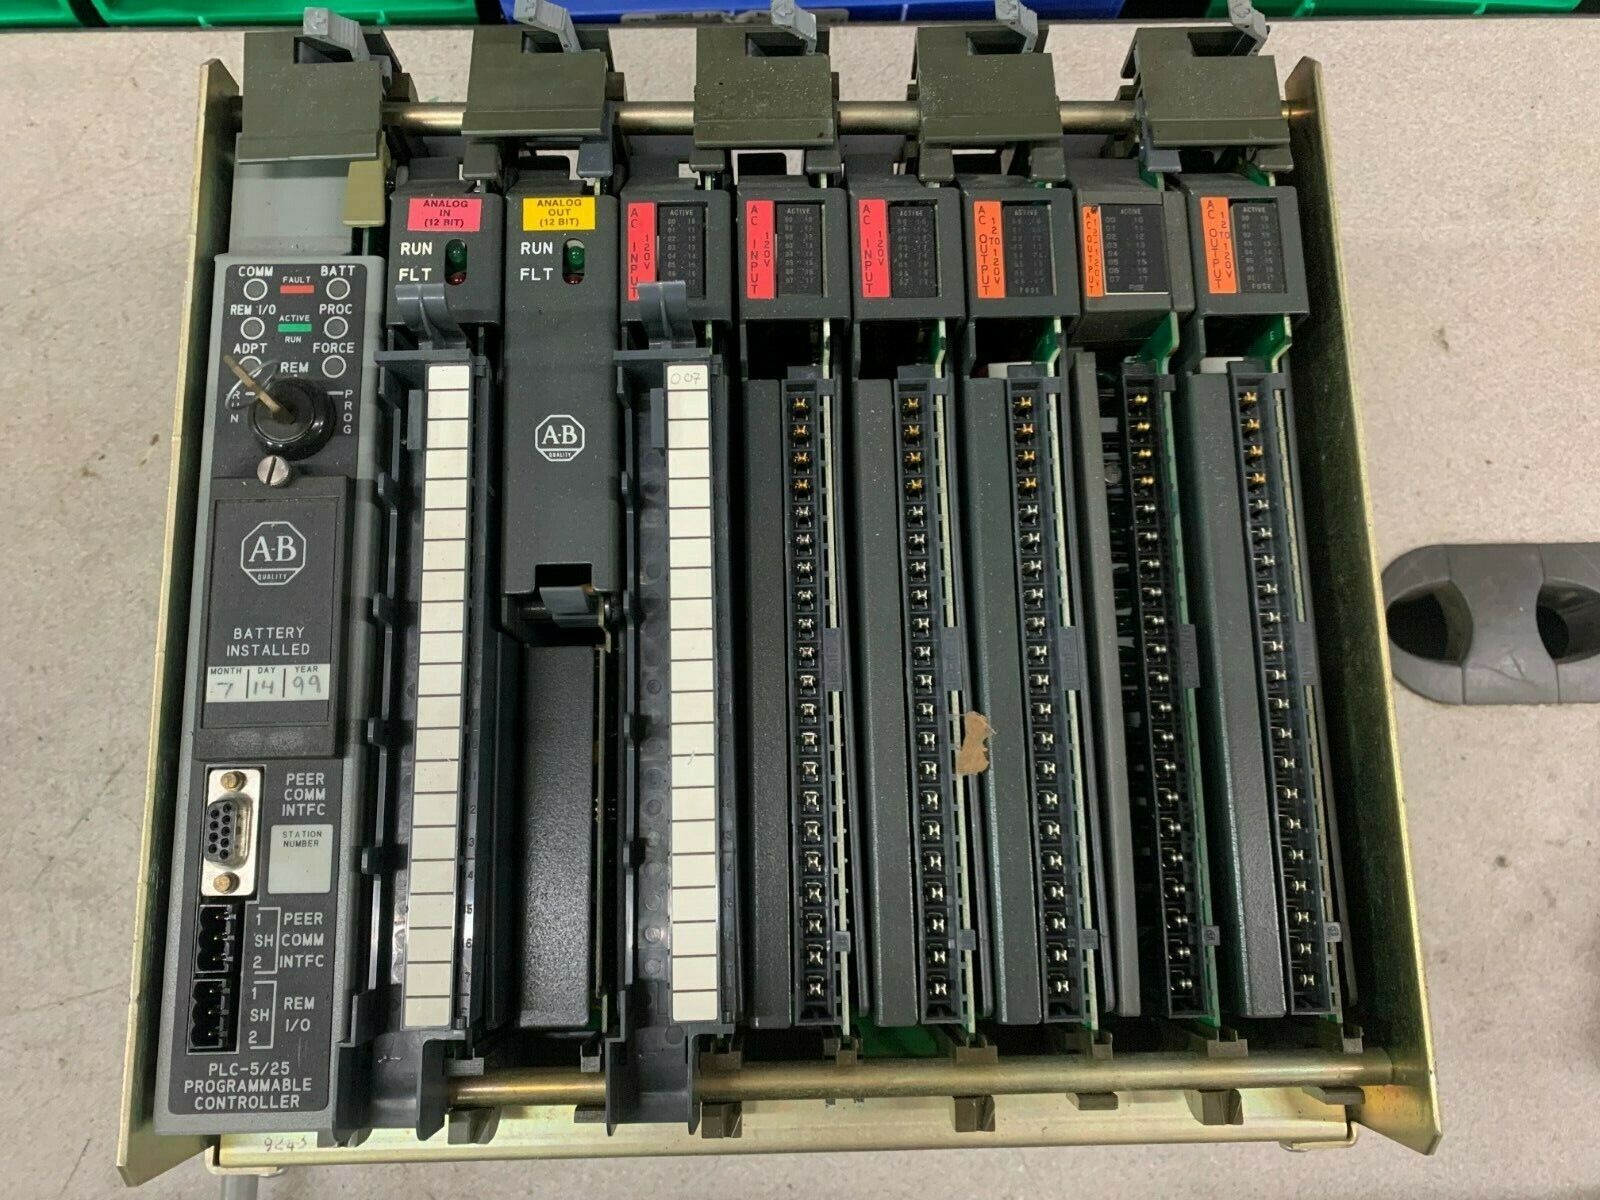 USED ALLEN-BRADLEY PLC-5 CHASSIS 1771-A2B WITH MODULES & PROCESSOR